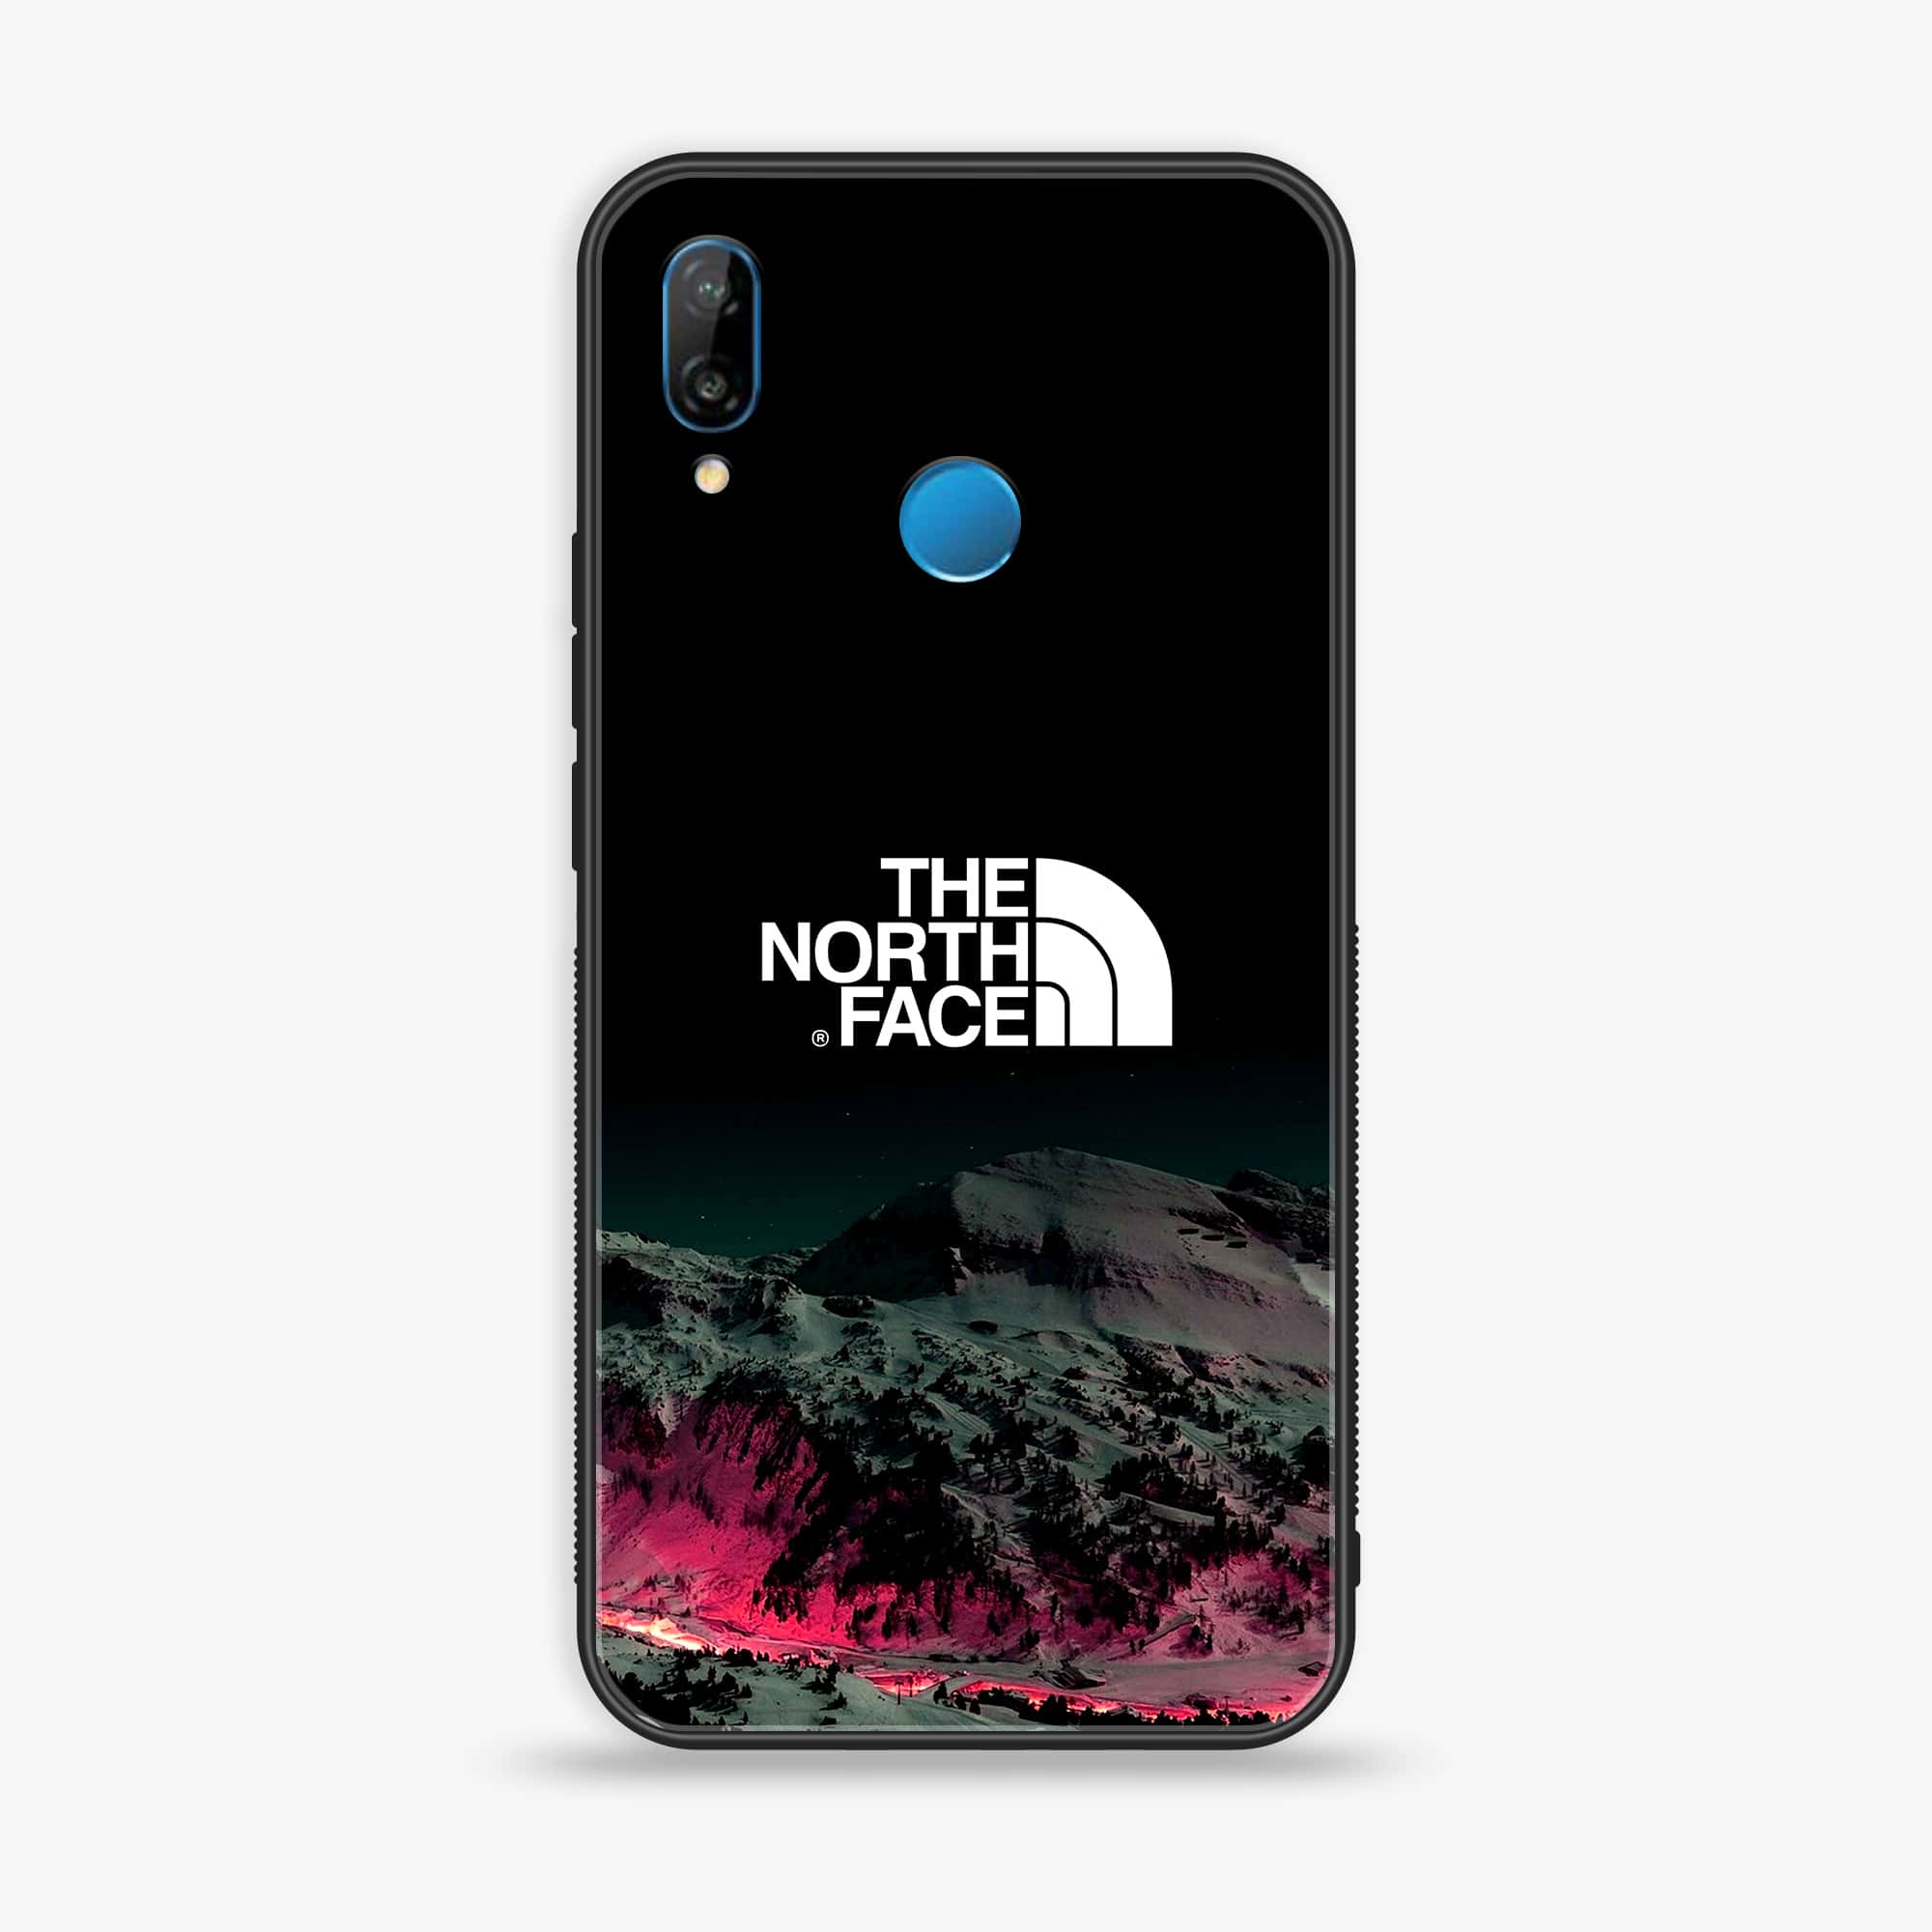 Huawei P20 lite - The North Face Series - Premium Printed Glass soft Bumper shock Proof Case